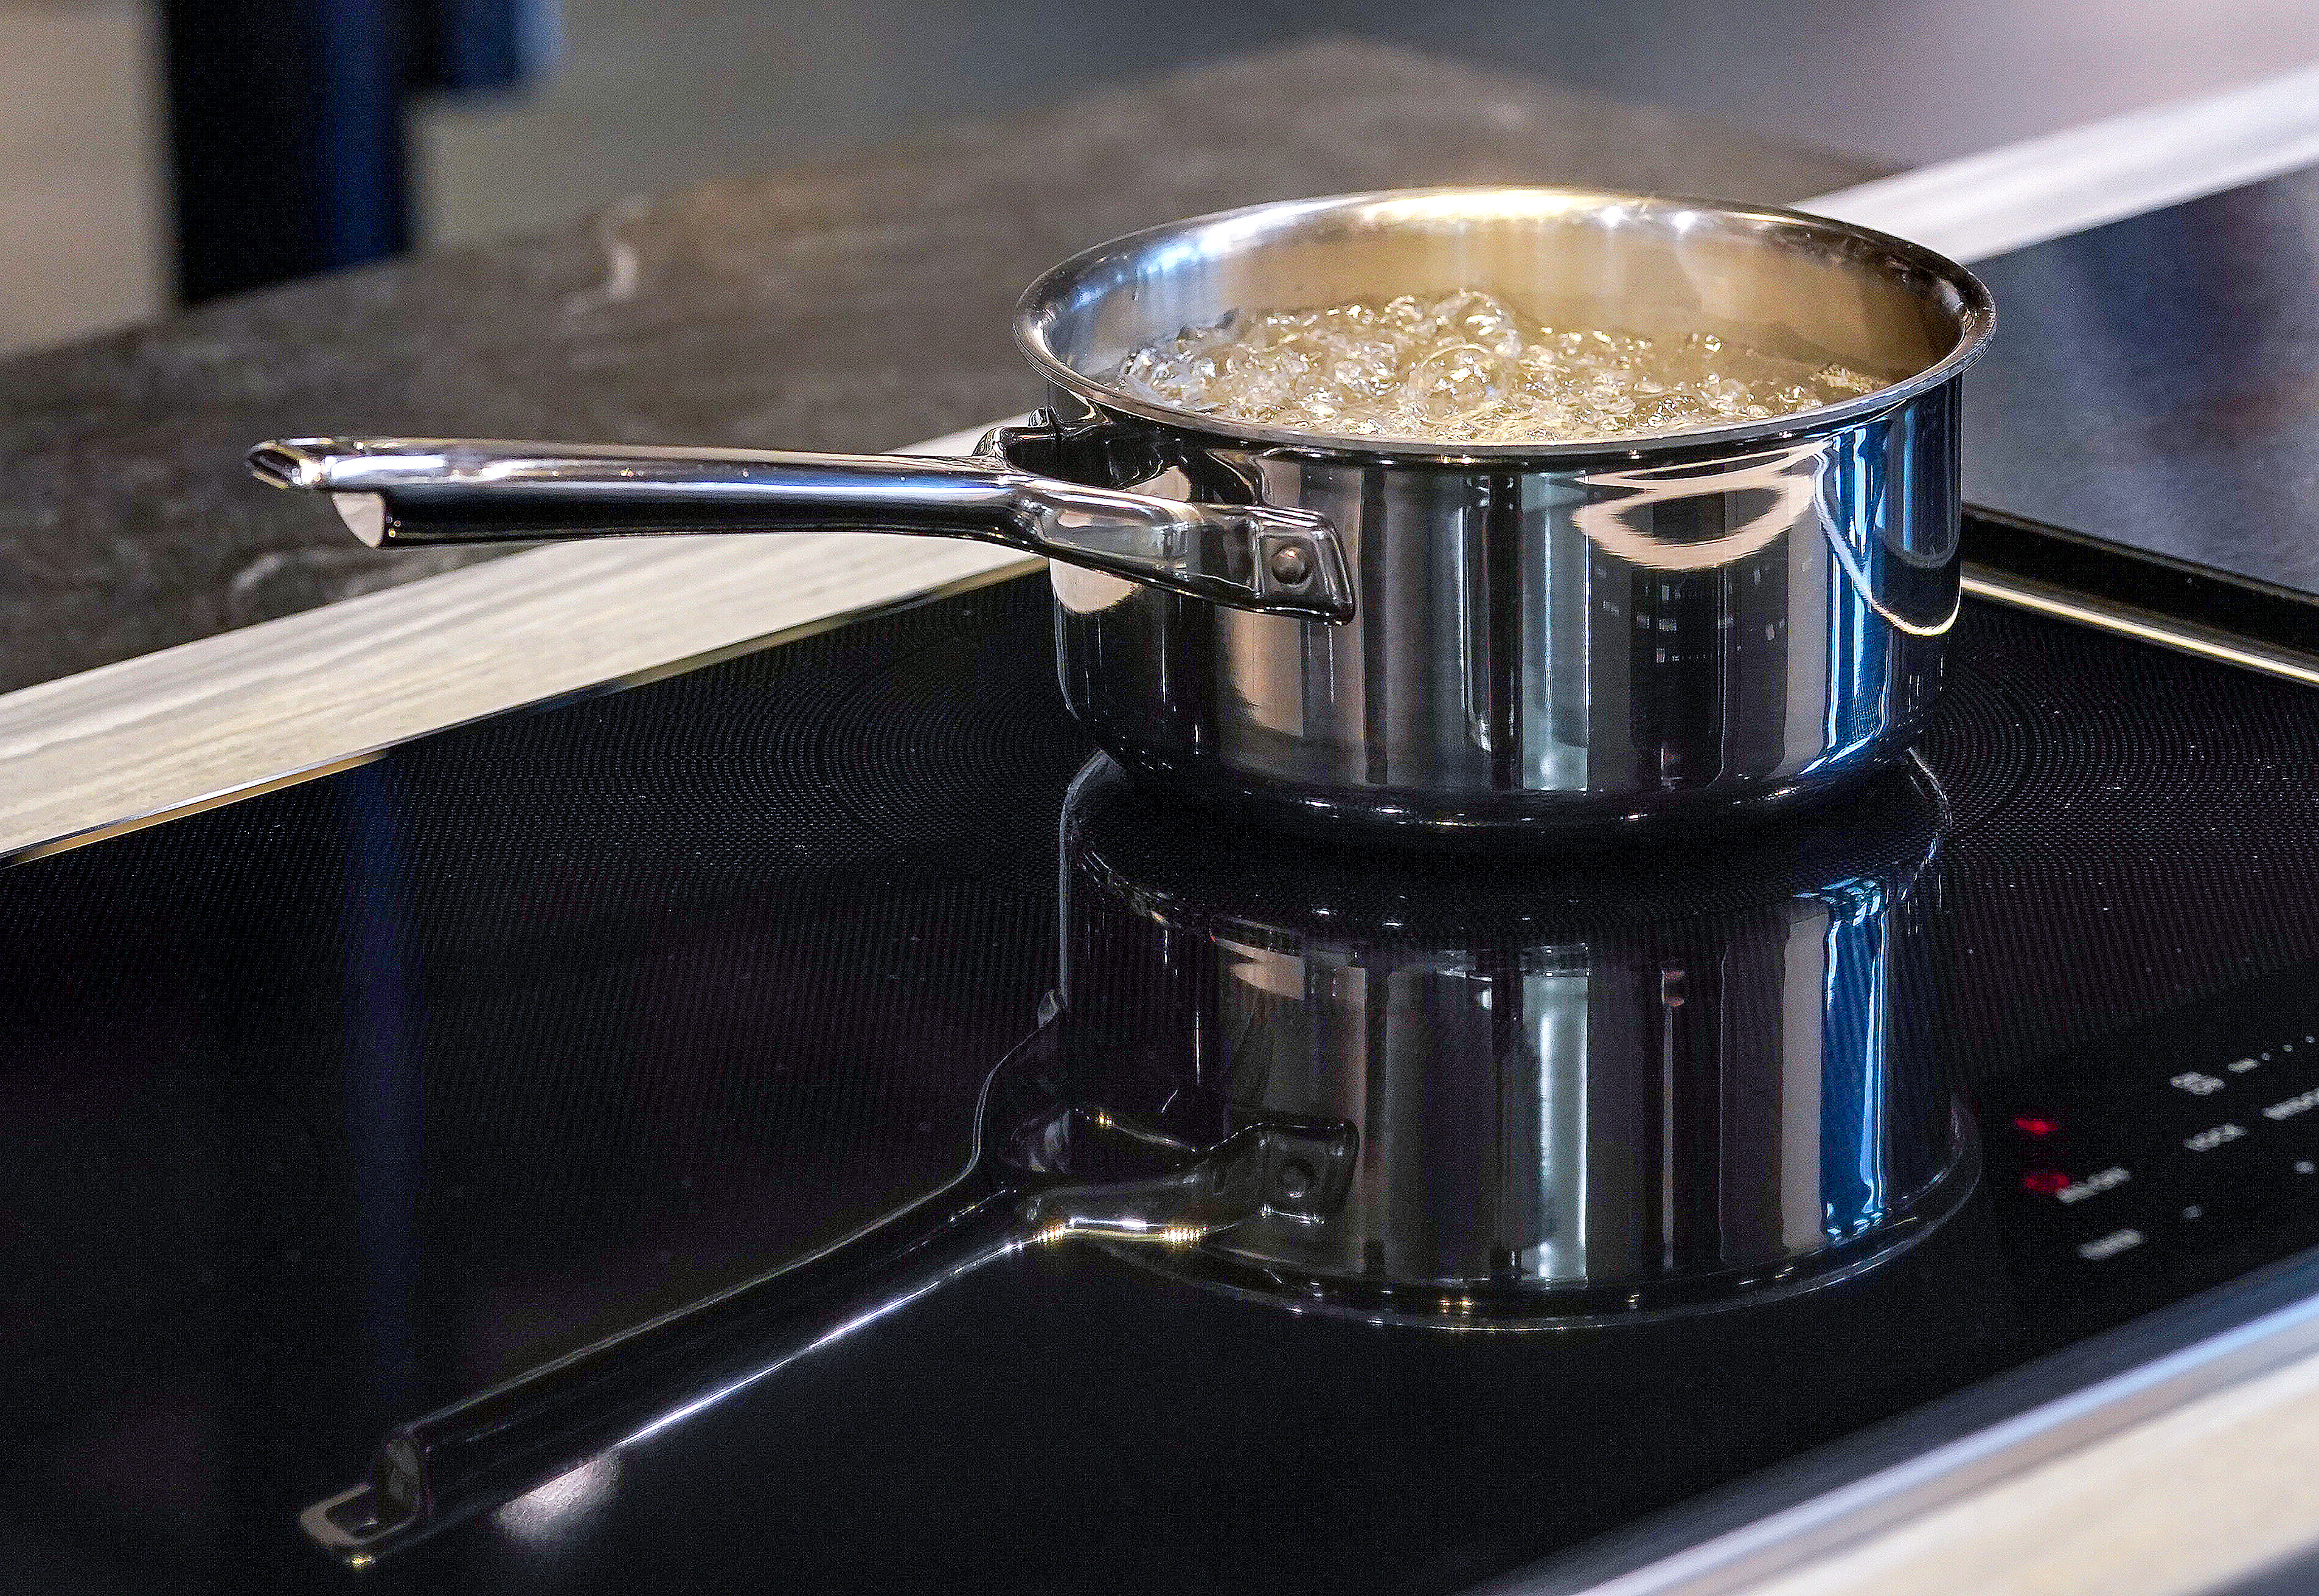 What to know about gas, electric stoves and induction cooktops - The  Washington Post